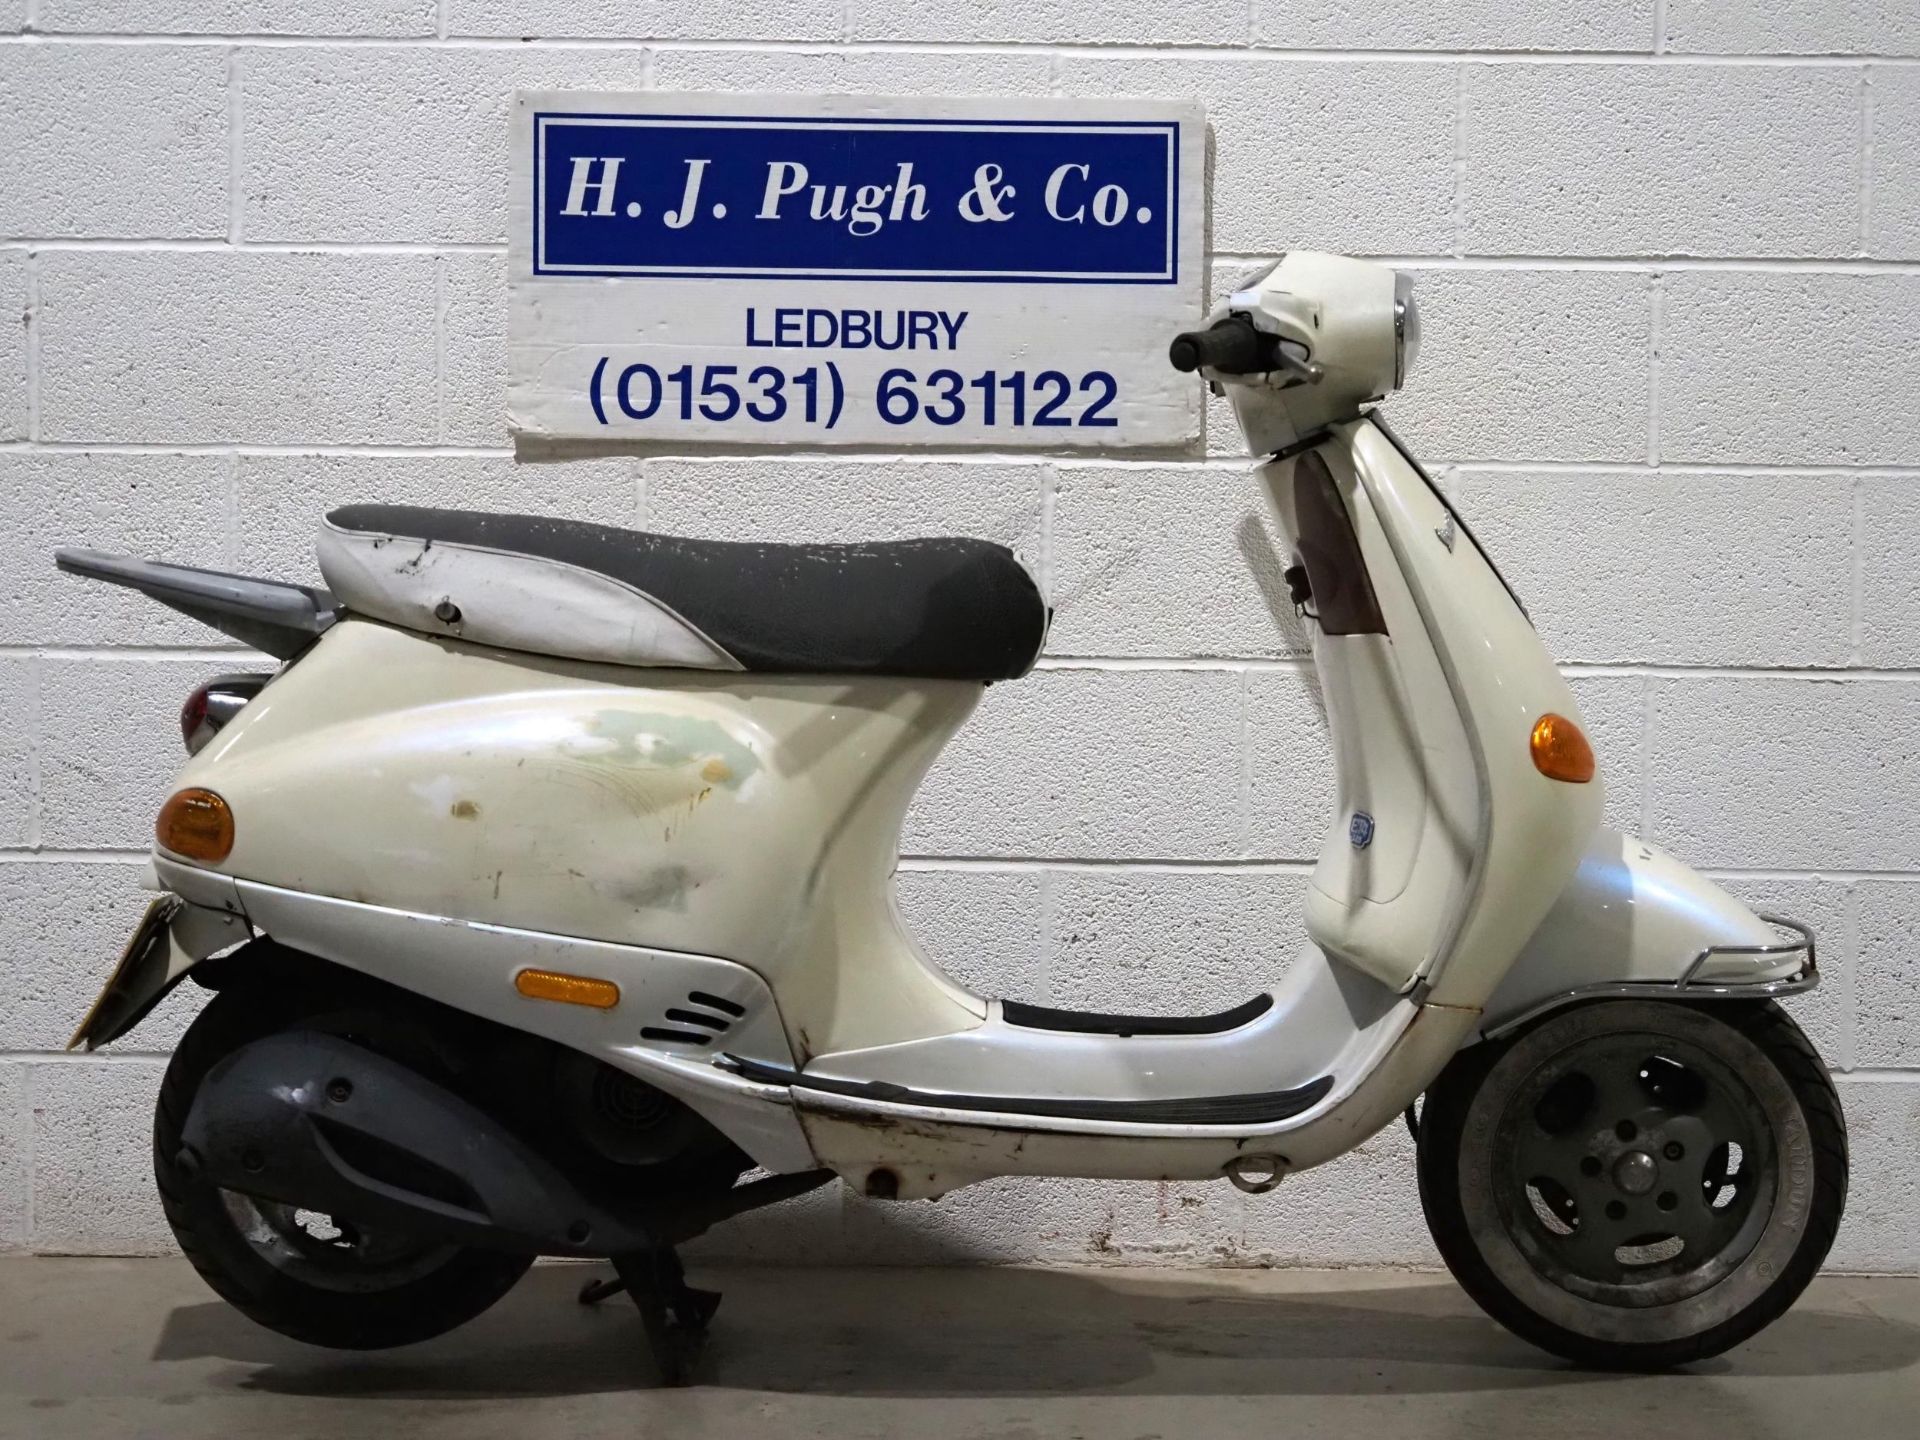 Vespa Piaggio ET4 125 moped. 2001. 124cc. Non runner and has been stood for several years. Engine